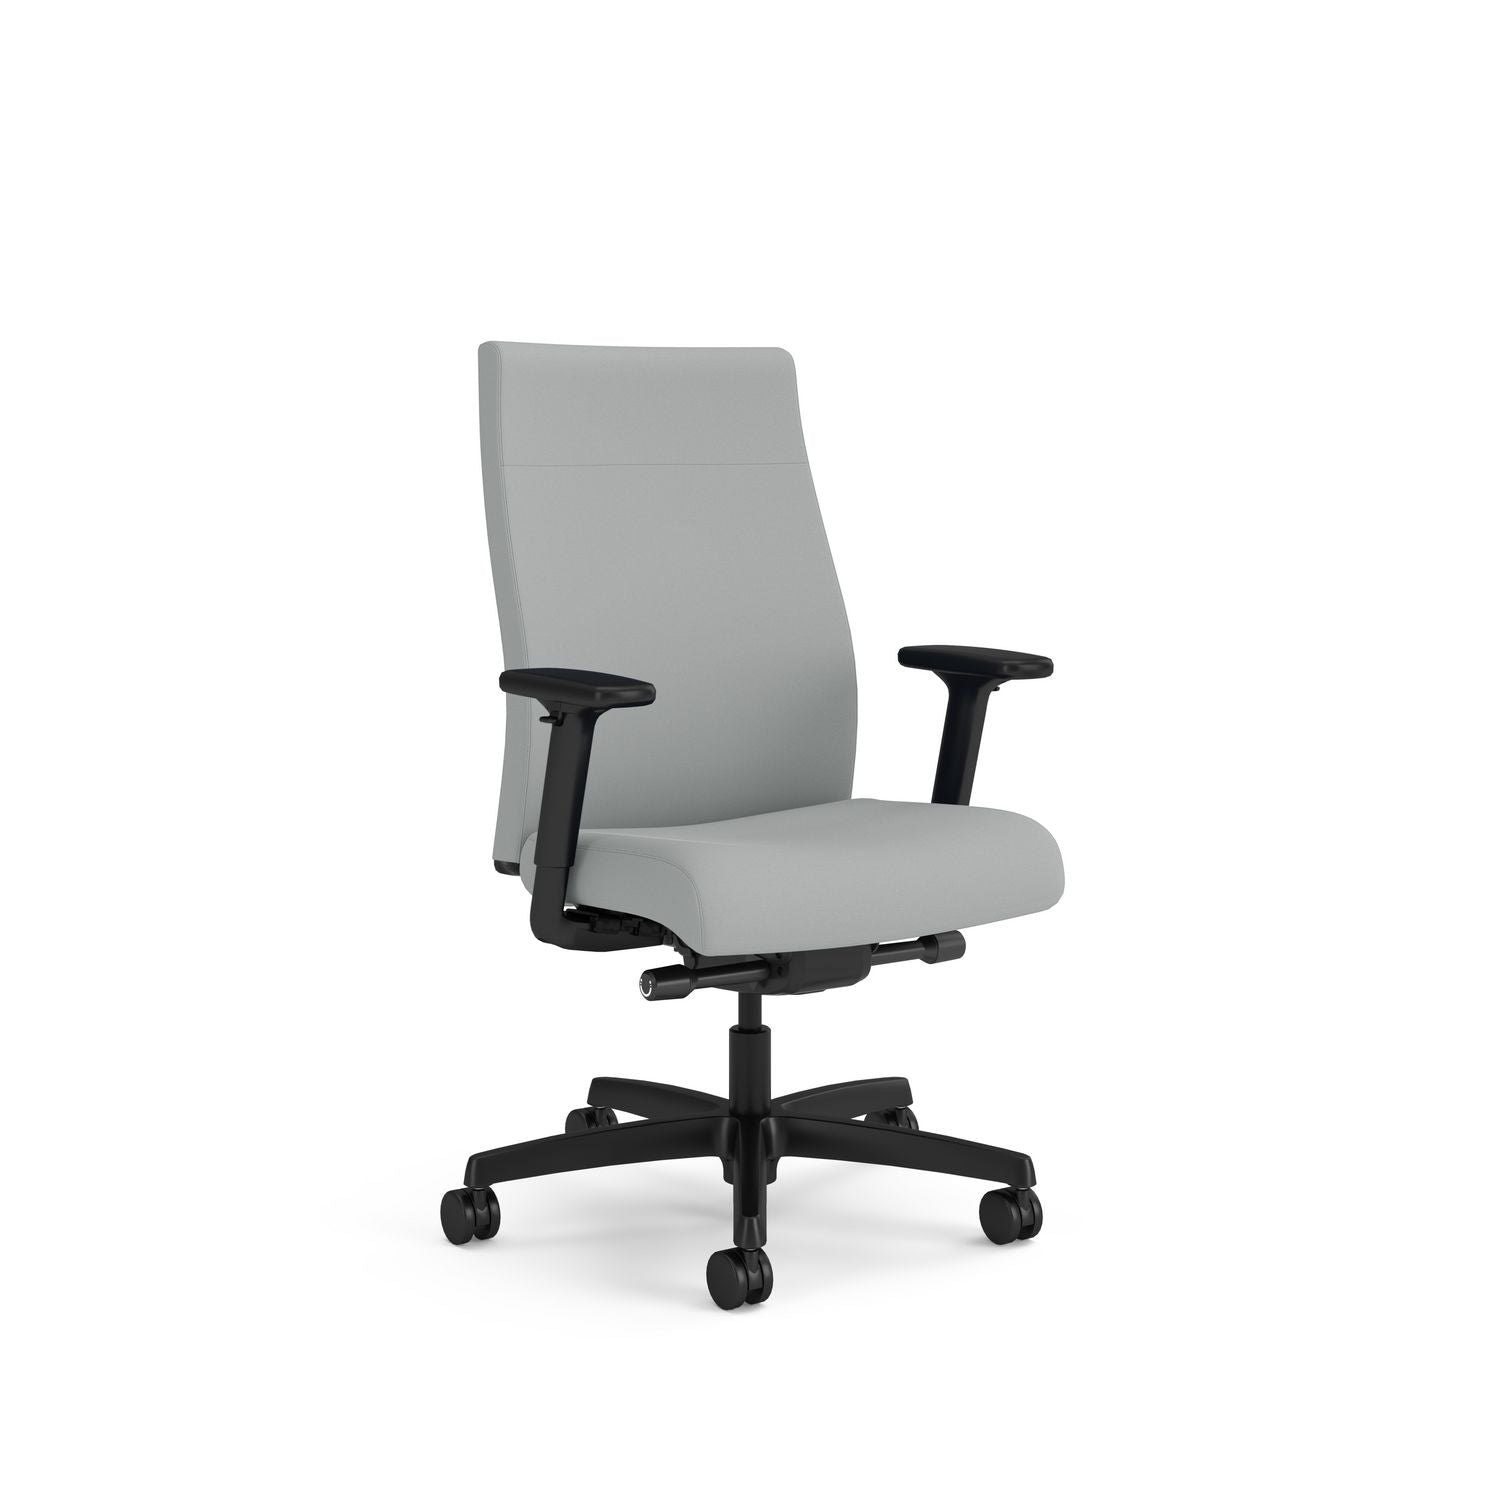 ignition-20-upholstered-mid-back-task-chair-up-to-300-lbs-17-to-215-seat-height-flint-seat-and-back-black-base_honi2u2asx39ntk - 1